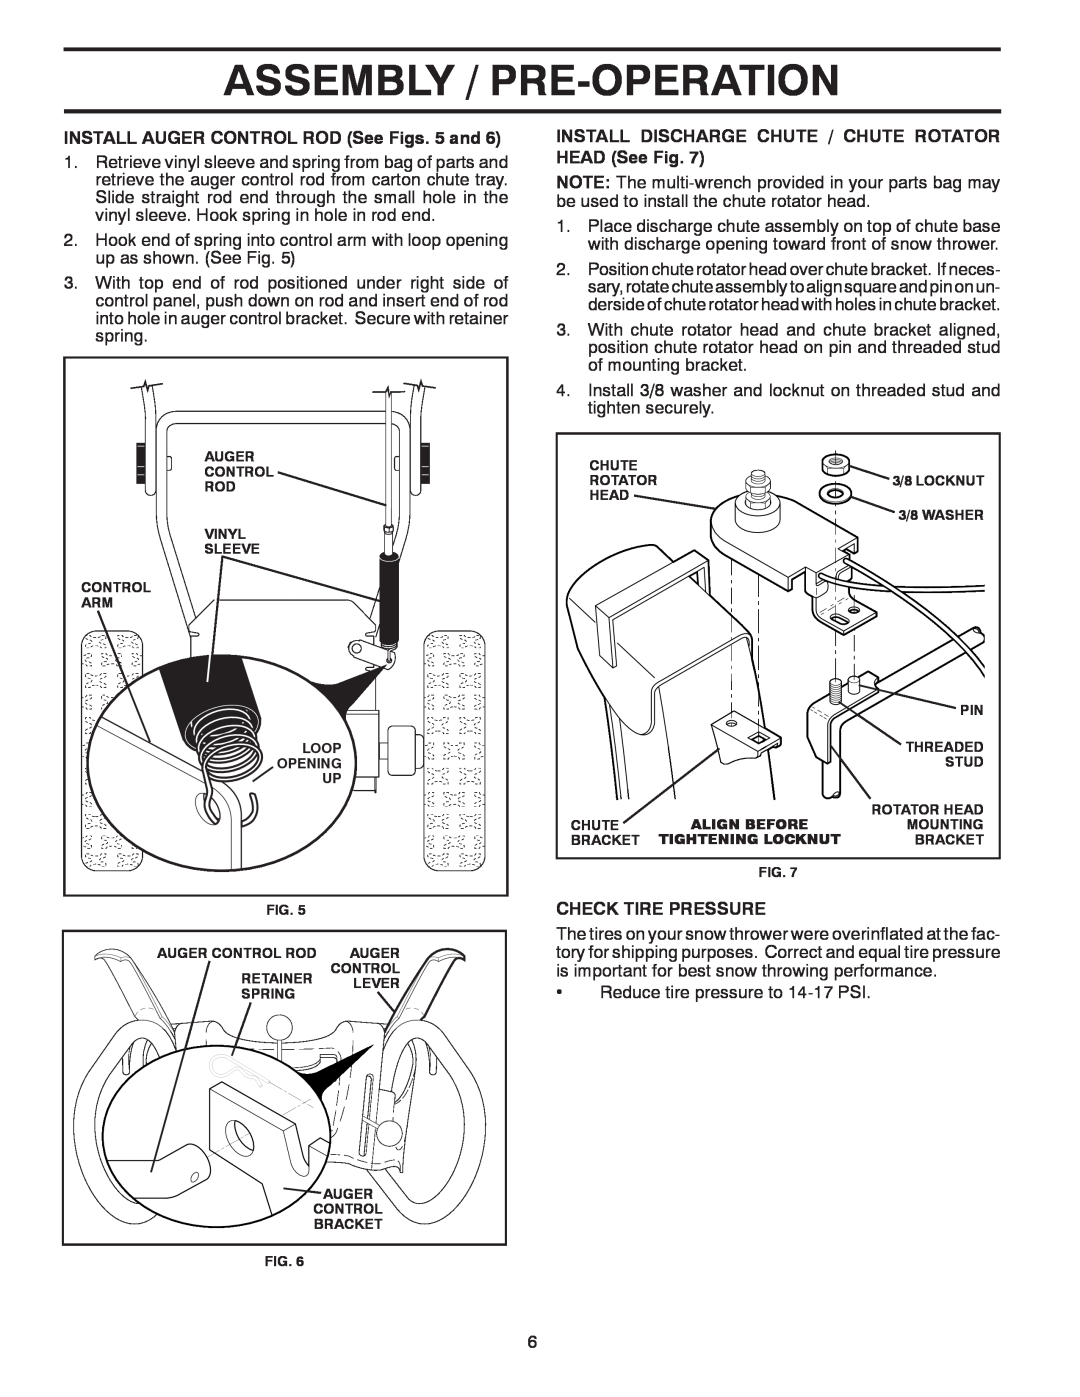 Poulan 428689, 96192002901 Assembly / Pre-Operation, INSTALL AUGER CONTROL ROD See Figs. 5 and, Check Tire Pressure 